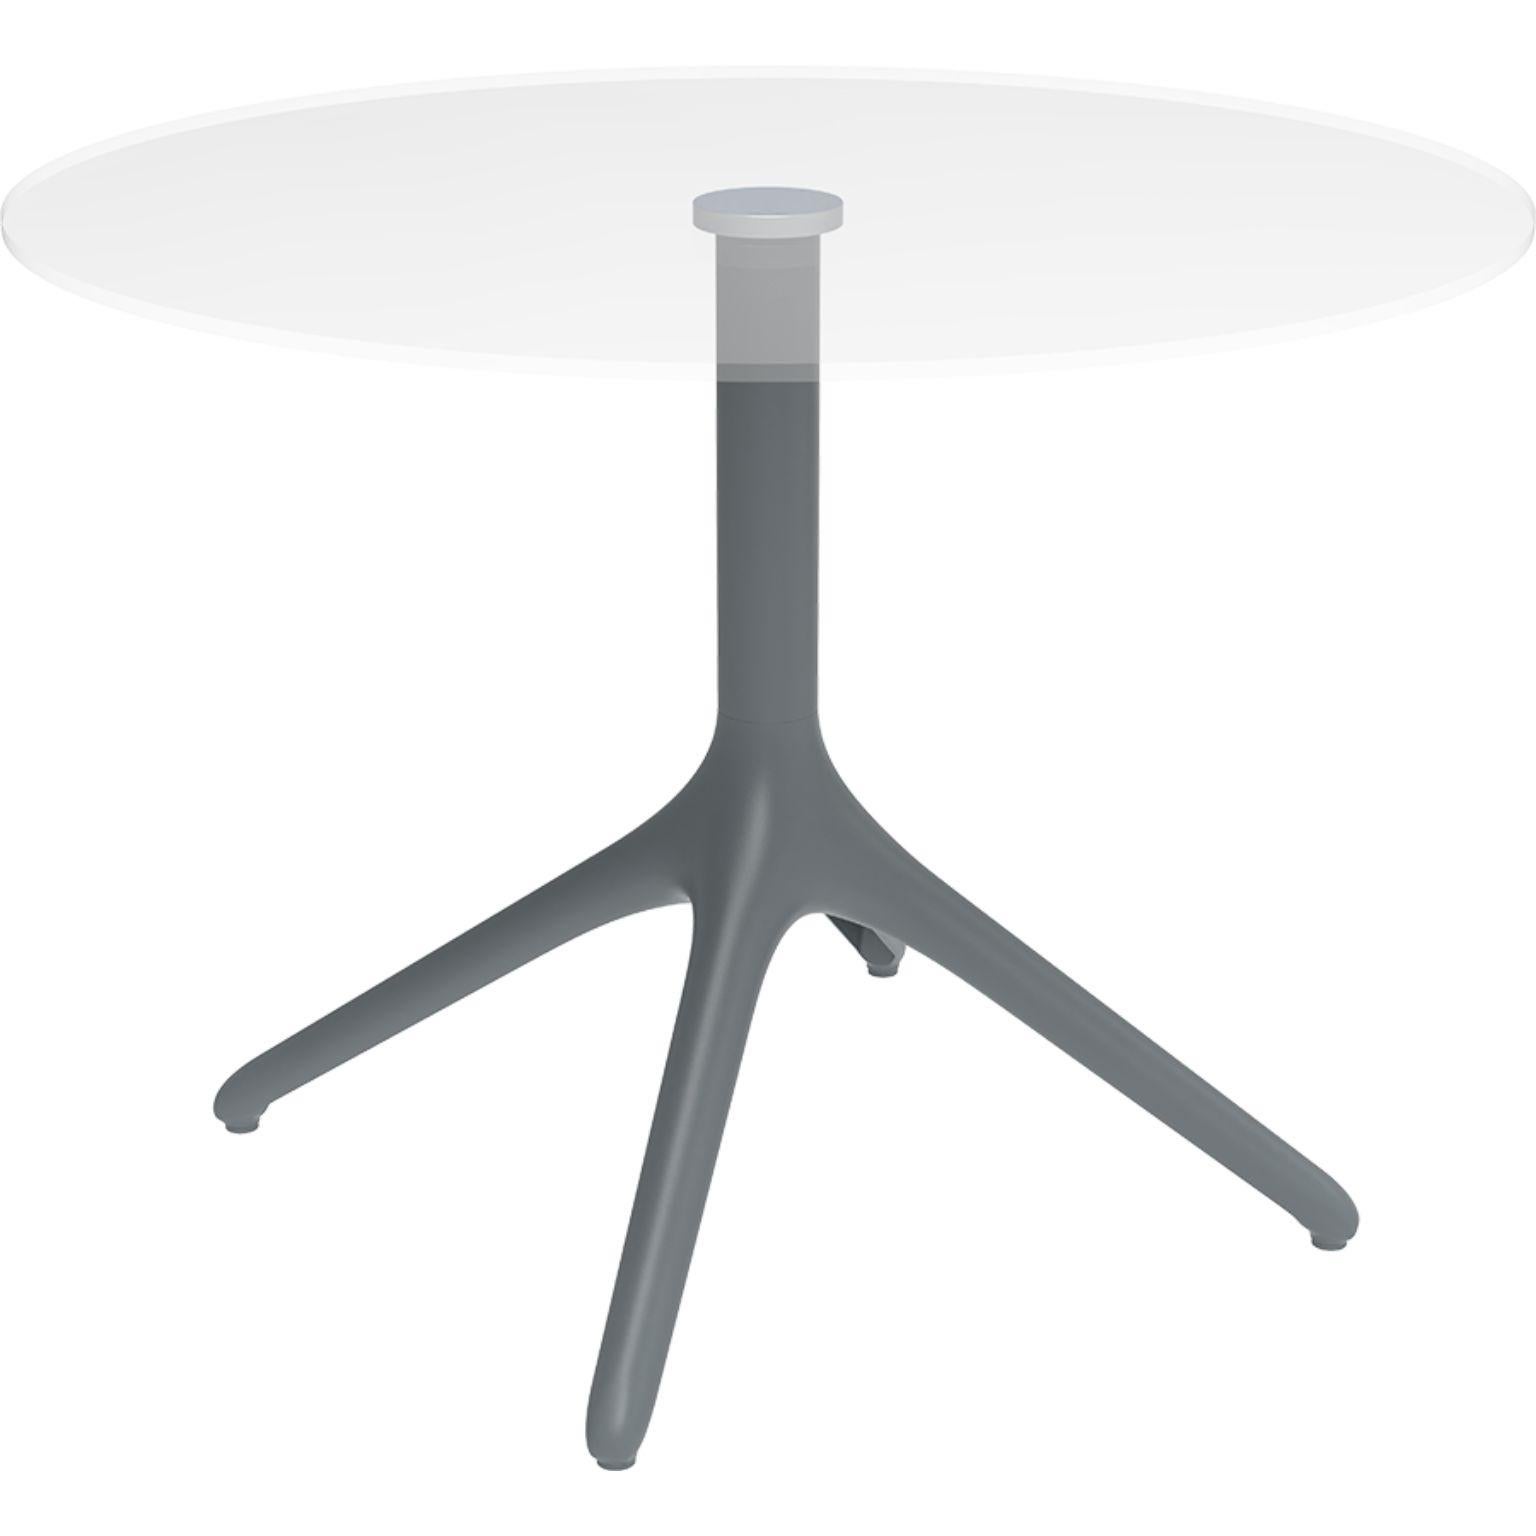 Uni grey table XL 73 by Mowee.
Dimensions: D50 x H73 cm.
Material: Aluminium, tempered glass.
Weight: 9 kg.
Also Available in different colours and finishes.

A table designed to be as versatile as possible and can coexist with a variety of